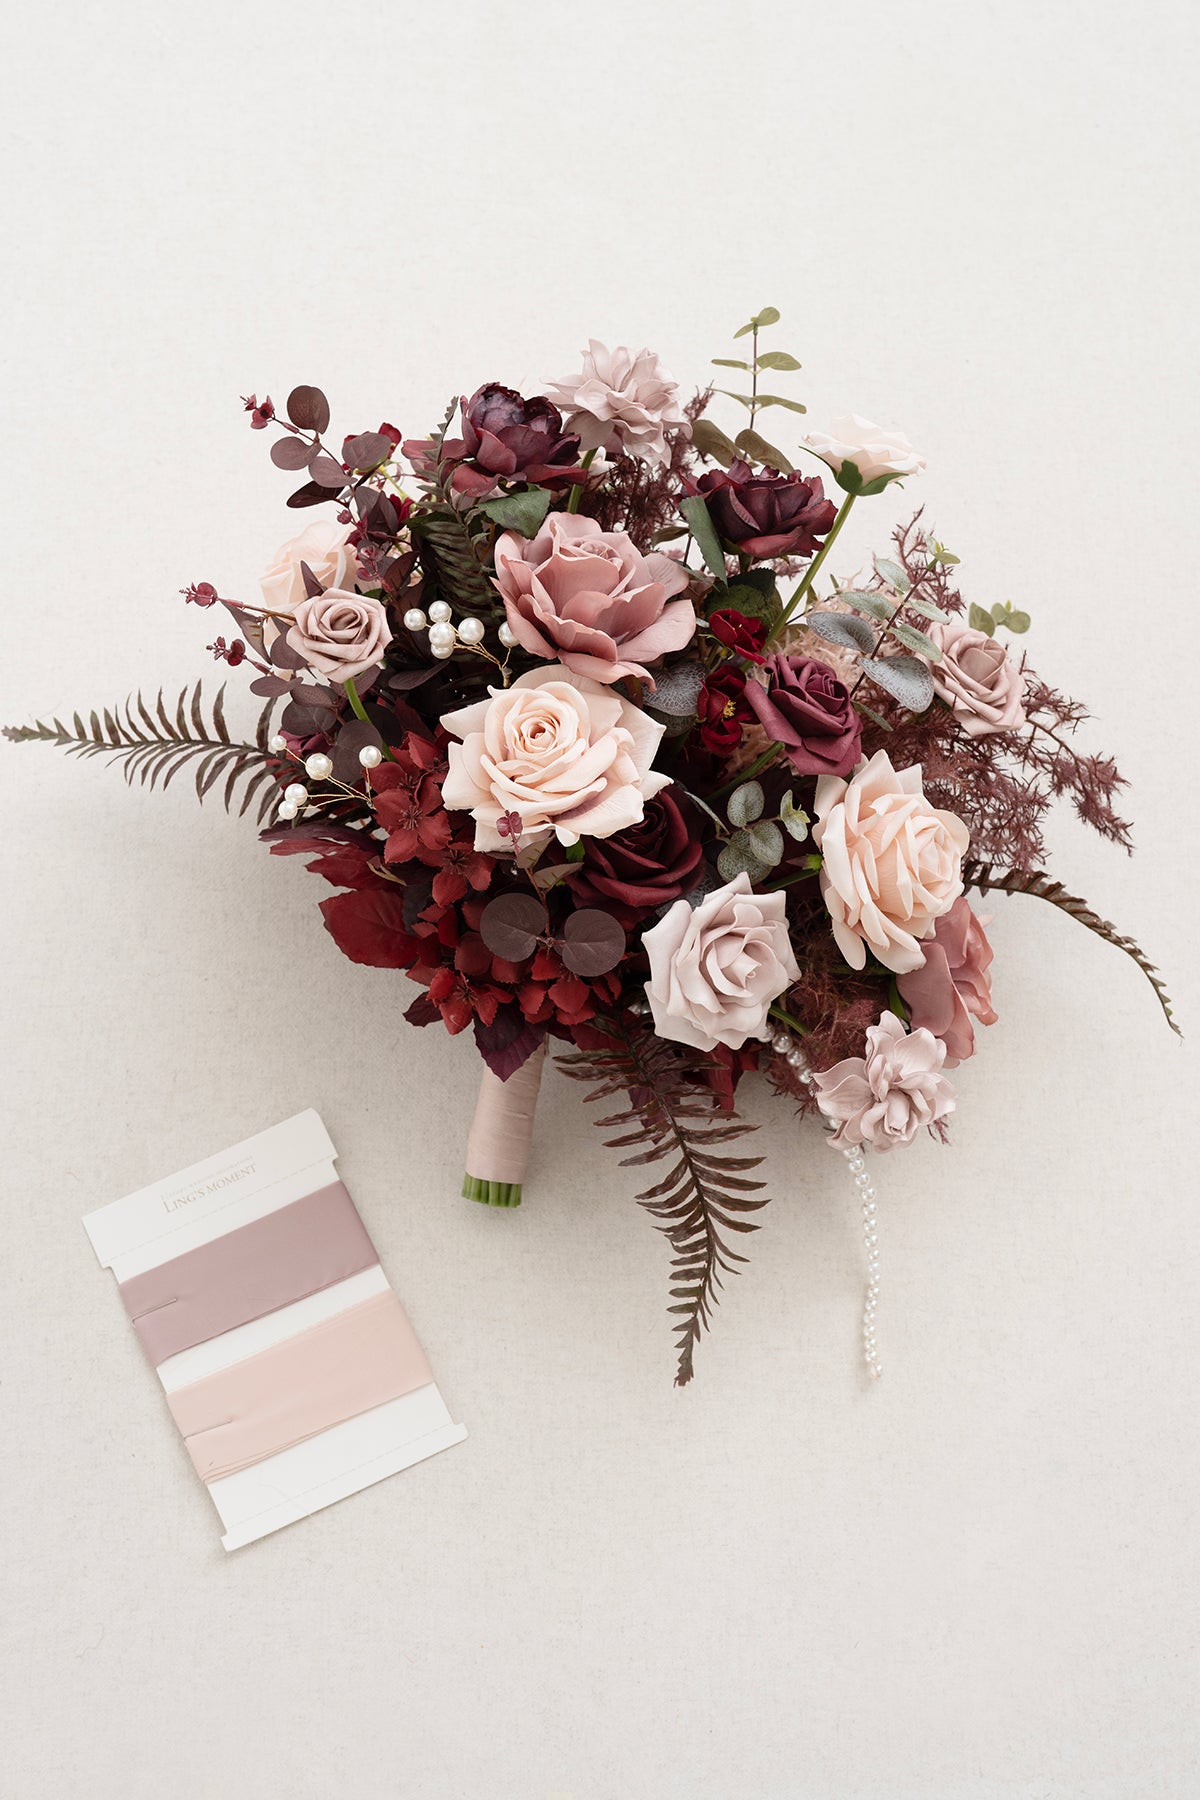 Large Free-Form Bridal Bouquet in Burgundy & Dusty Rose